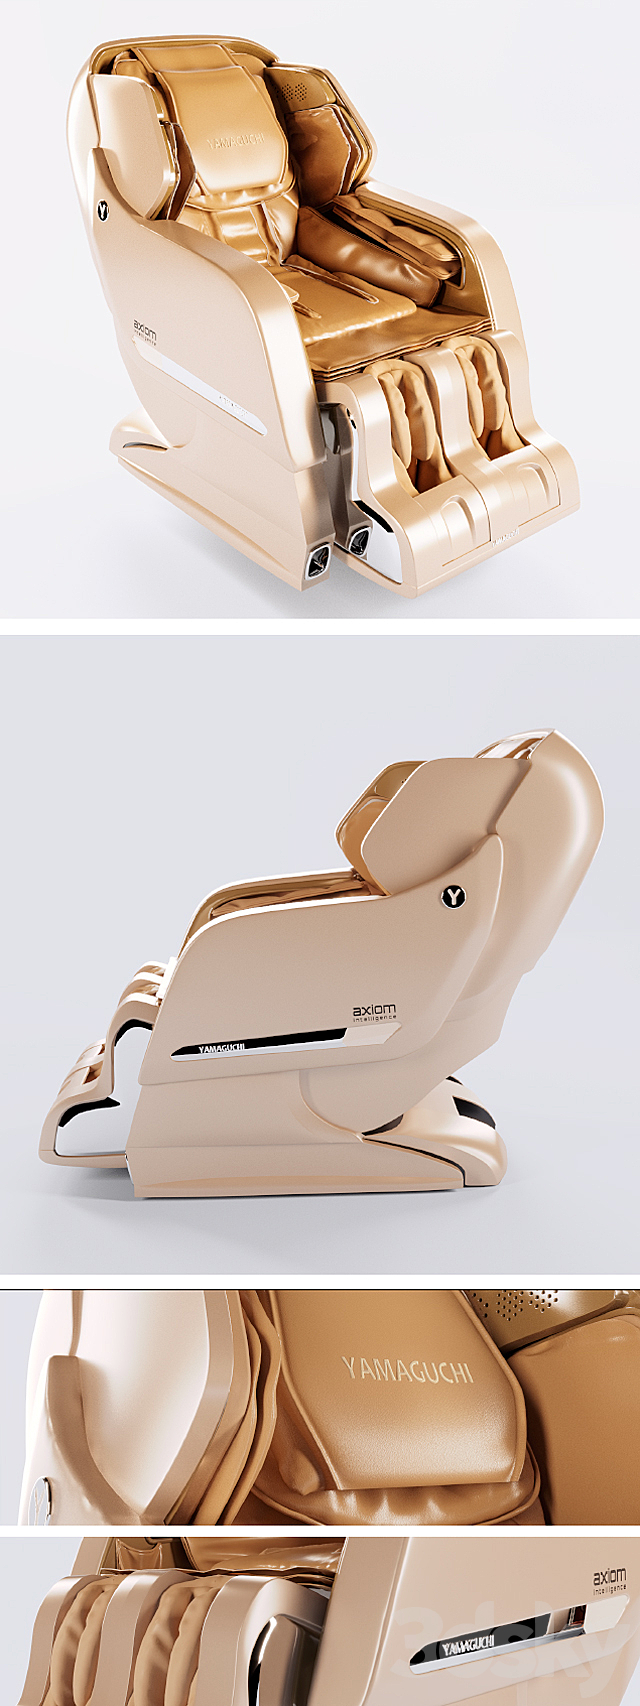 Massage chair Yamaguchi Axiom in Champagne and Chrome colors 3DSMax File - thumbnail 2